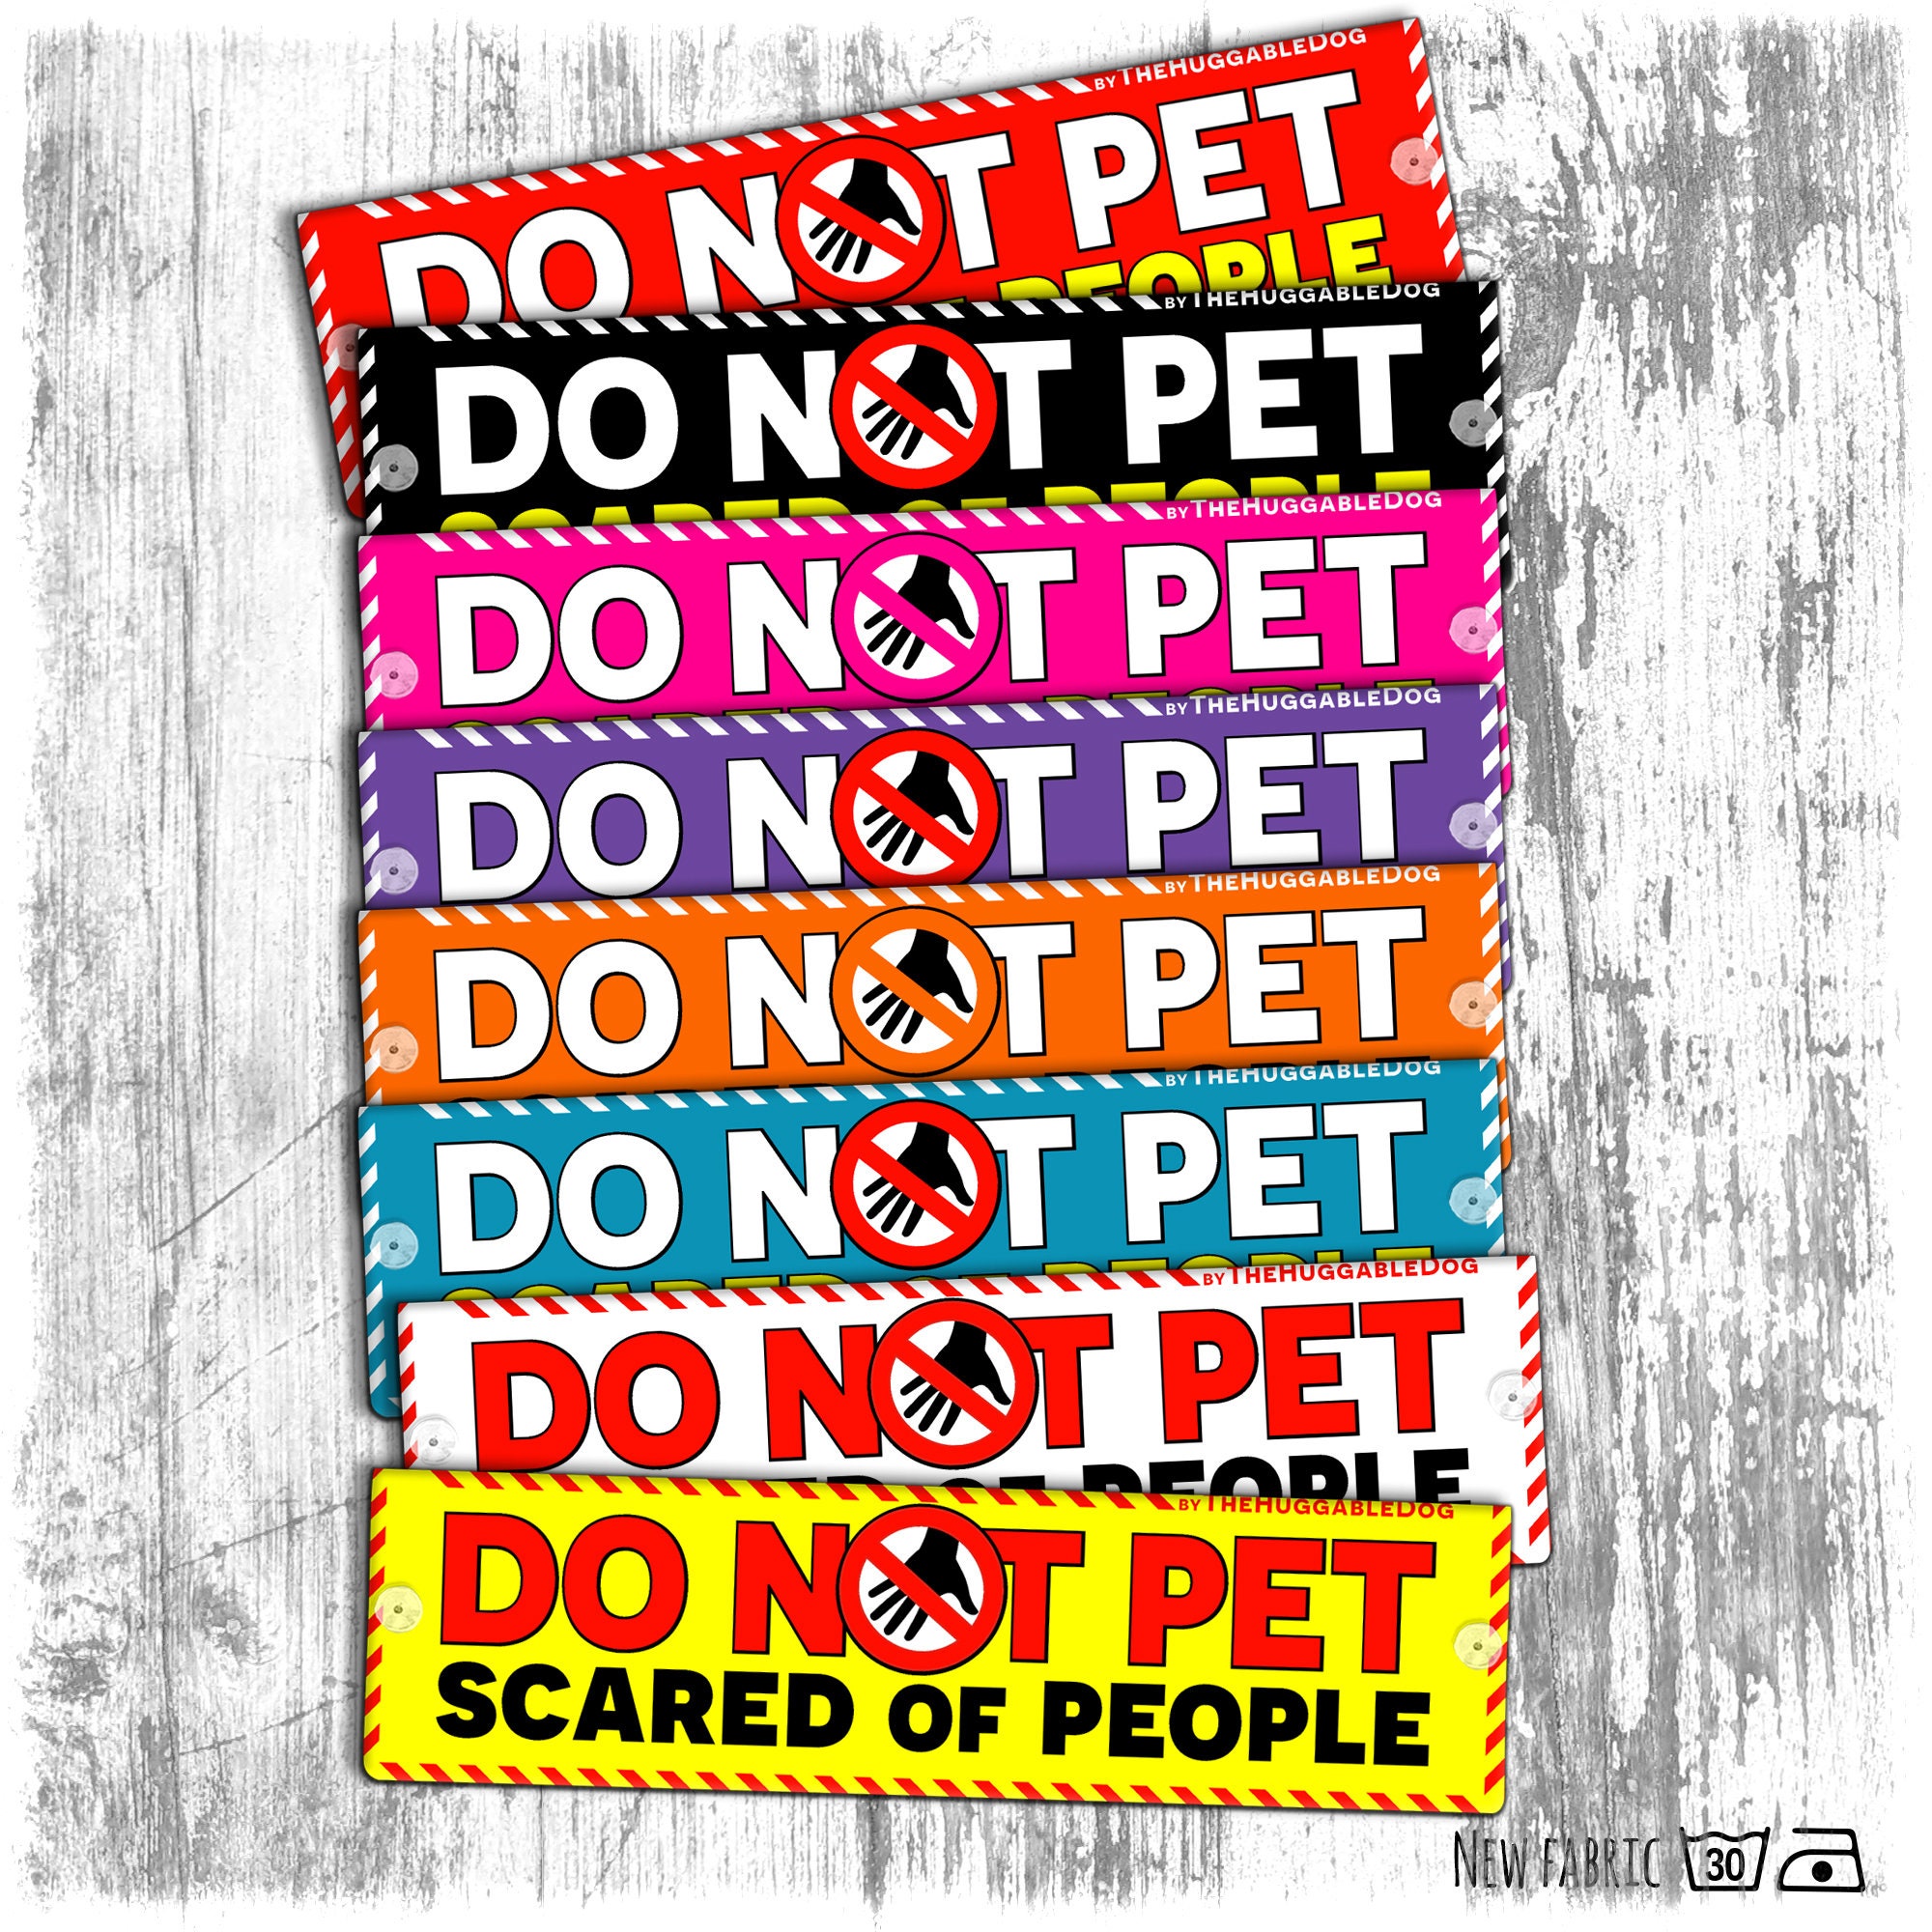 DO NOT PET, Scared of People, Warning Leash Sleeves for Dogs. 